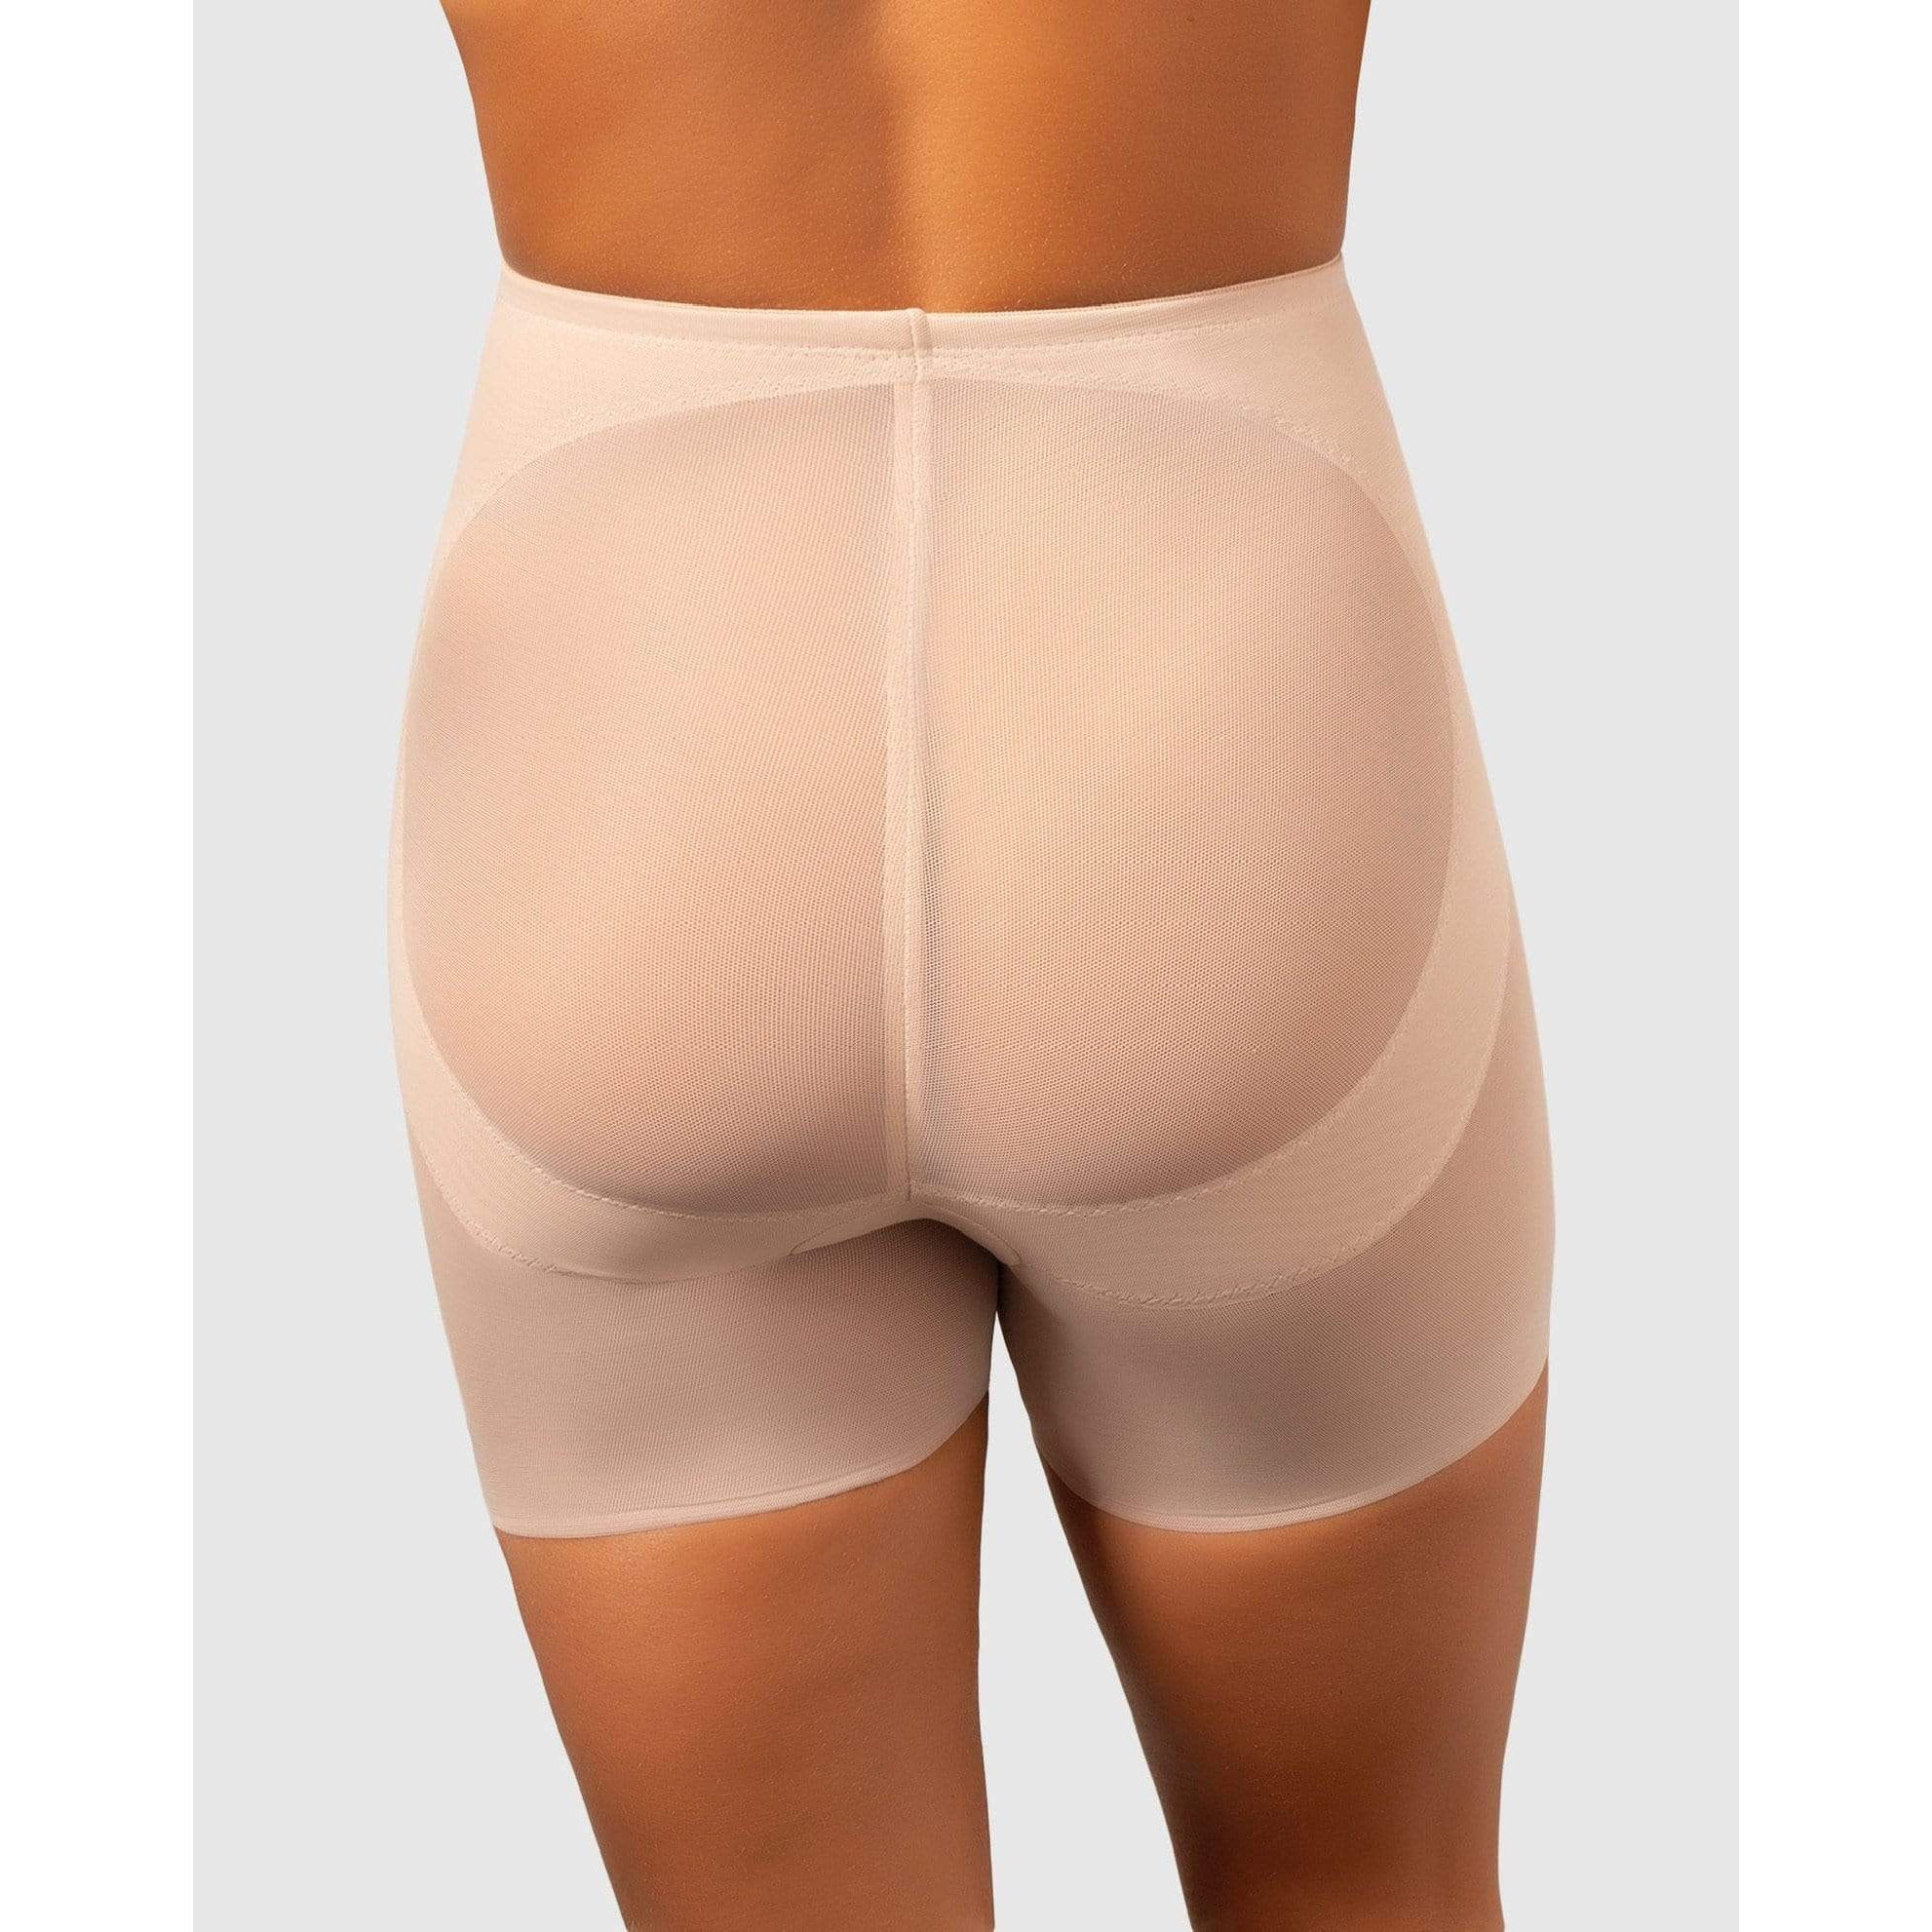 Miraclesuit Shapewear Rear Lifting Boy Short from Illusions Lingerie in Melbourne